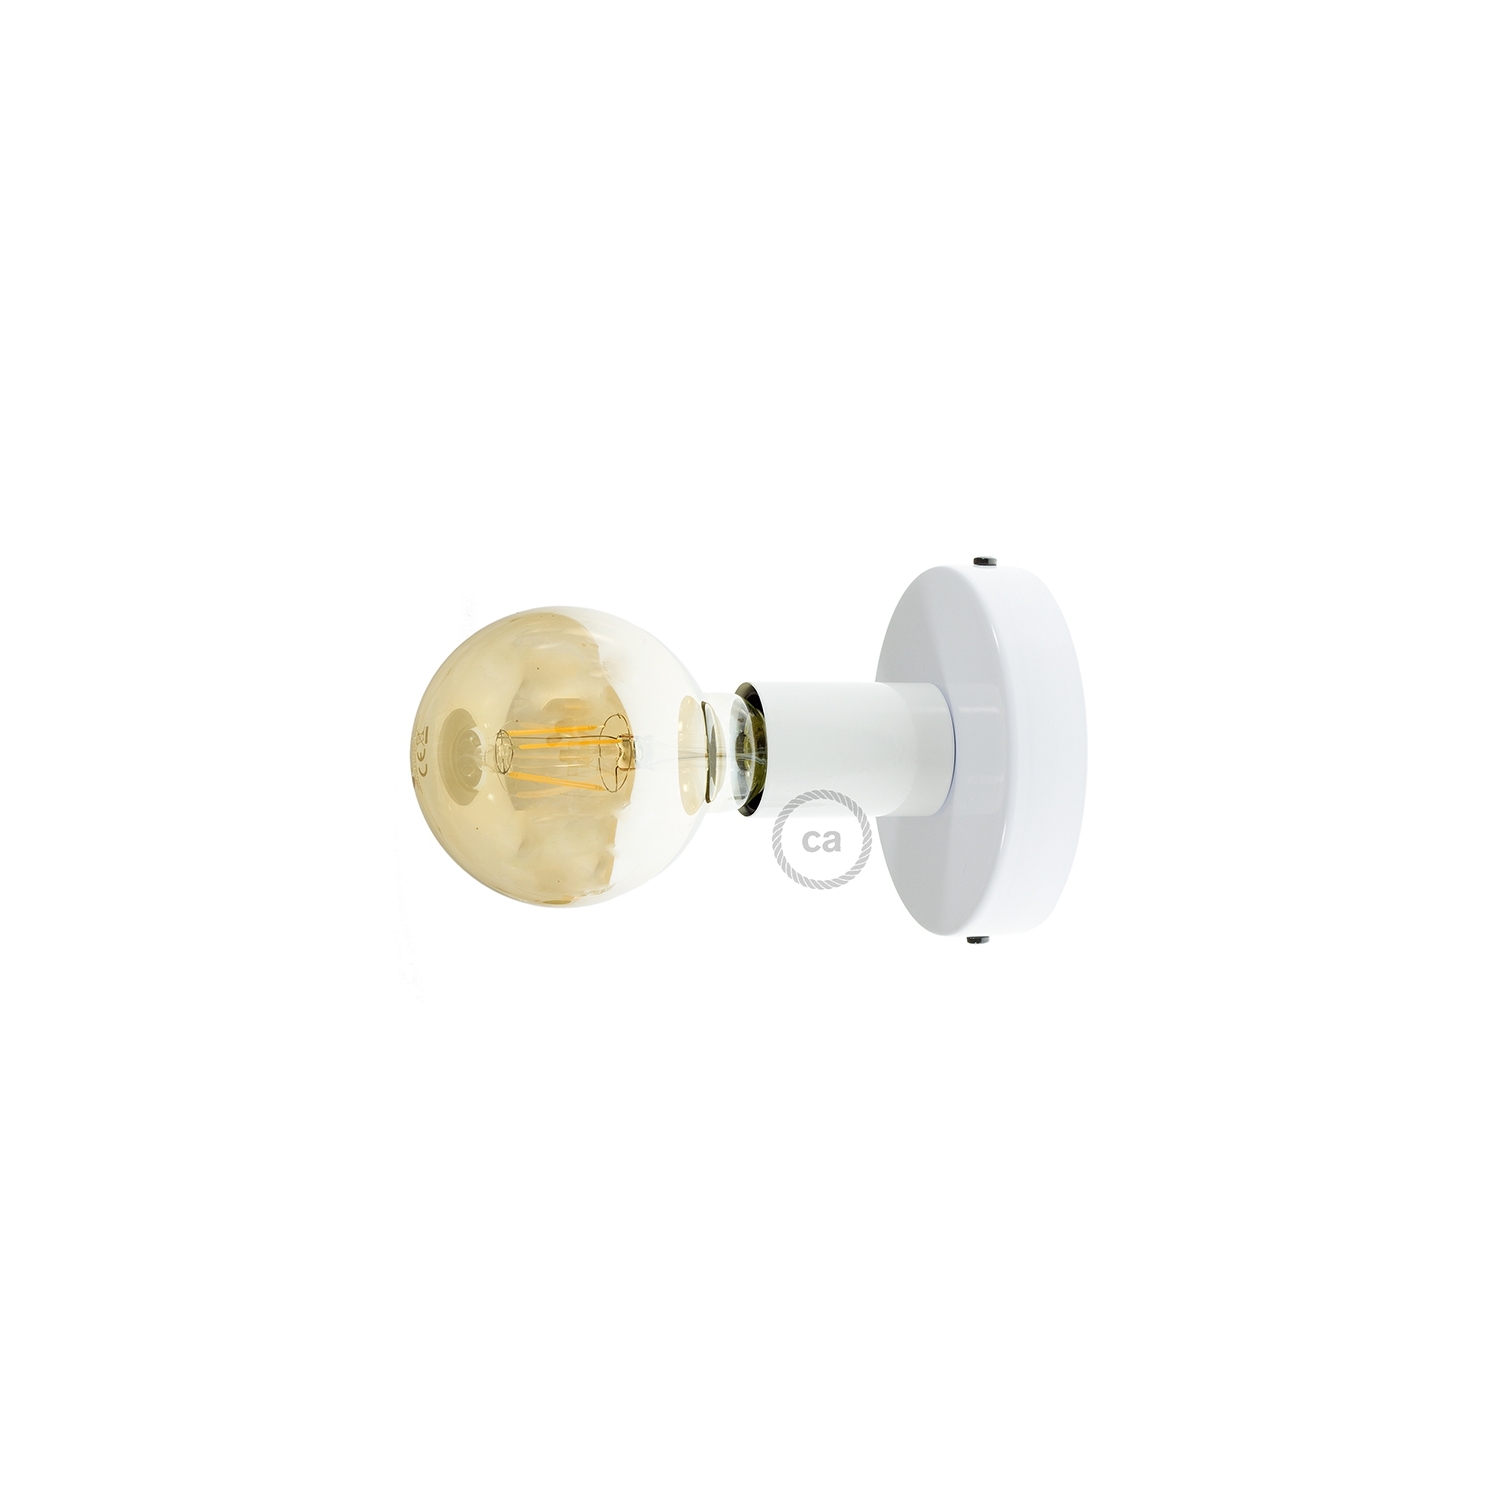 Fermaluce, the white metal wall or ceiling light source.